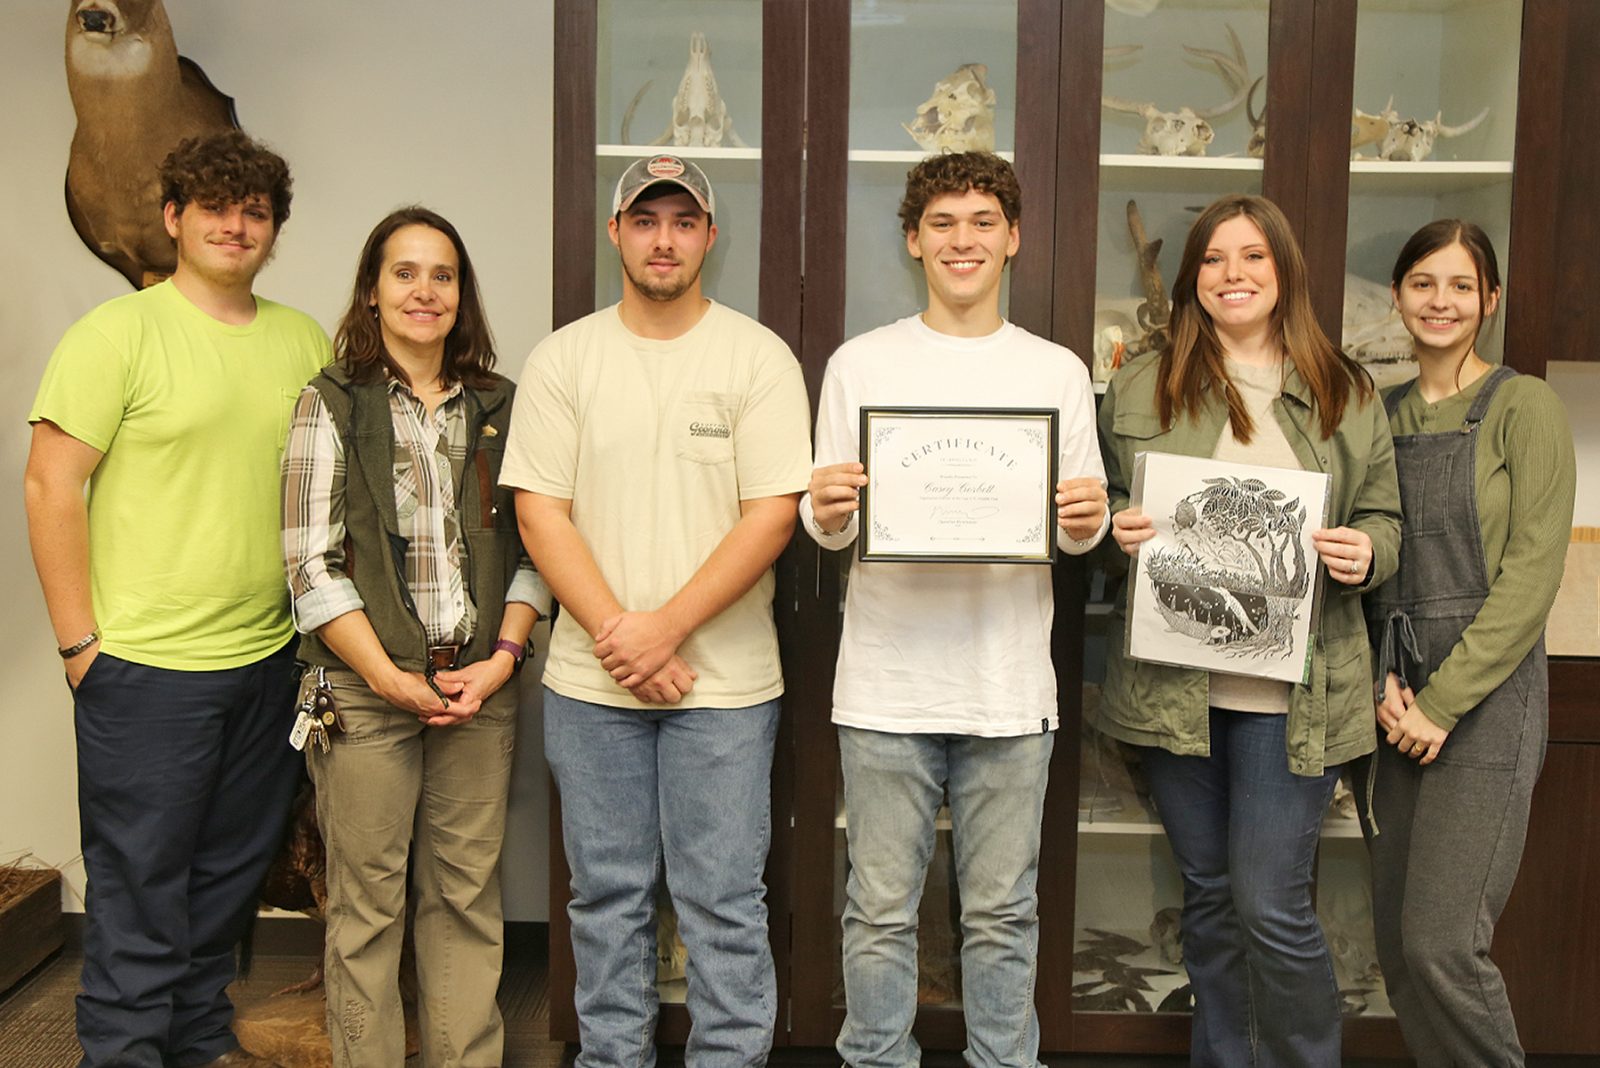  Ogeechee Technical College’s (OTC) Wildlife Club was named the Volunteer Organization of the Year by the Ogeechee River Keepers.